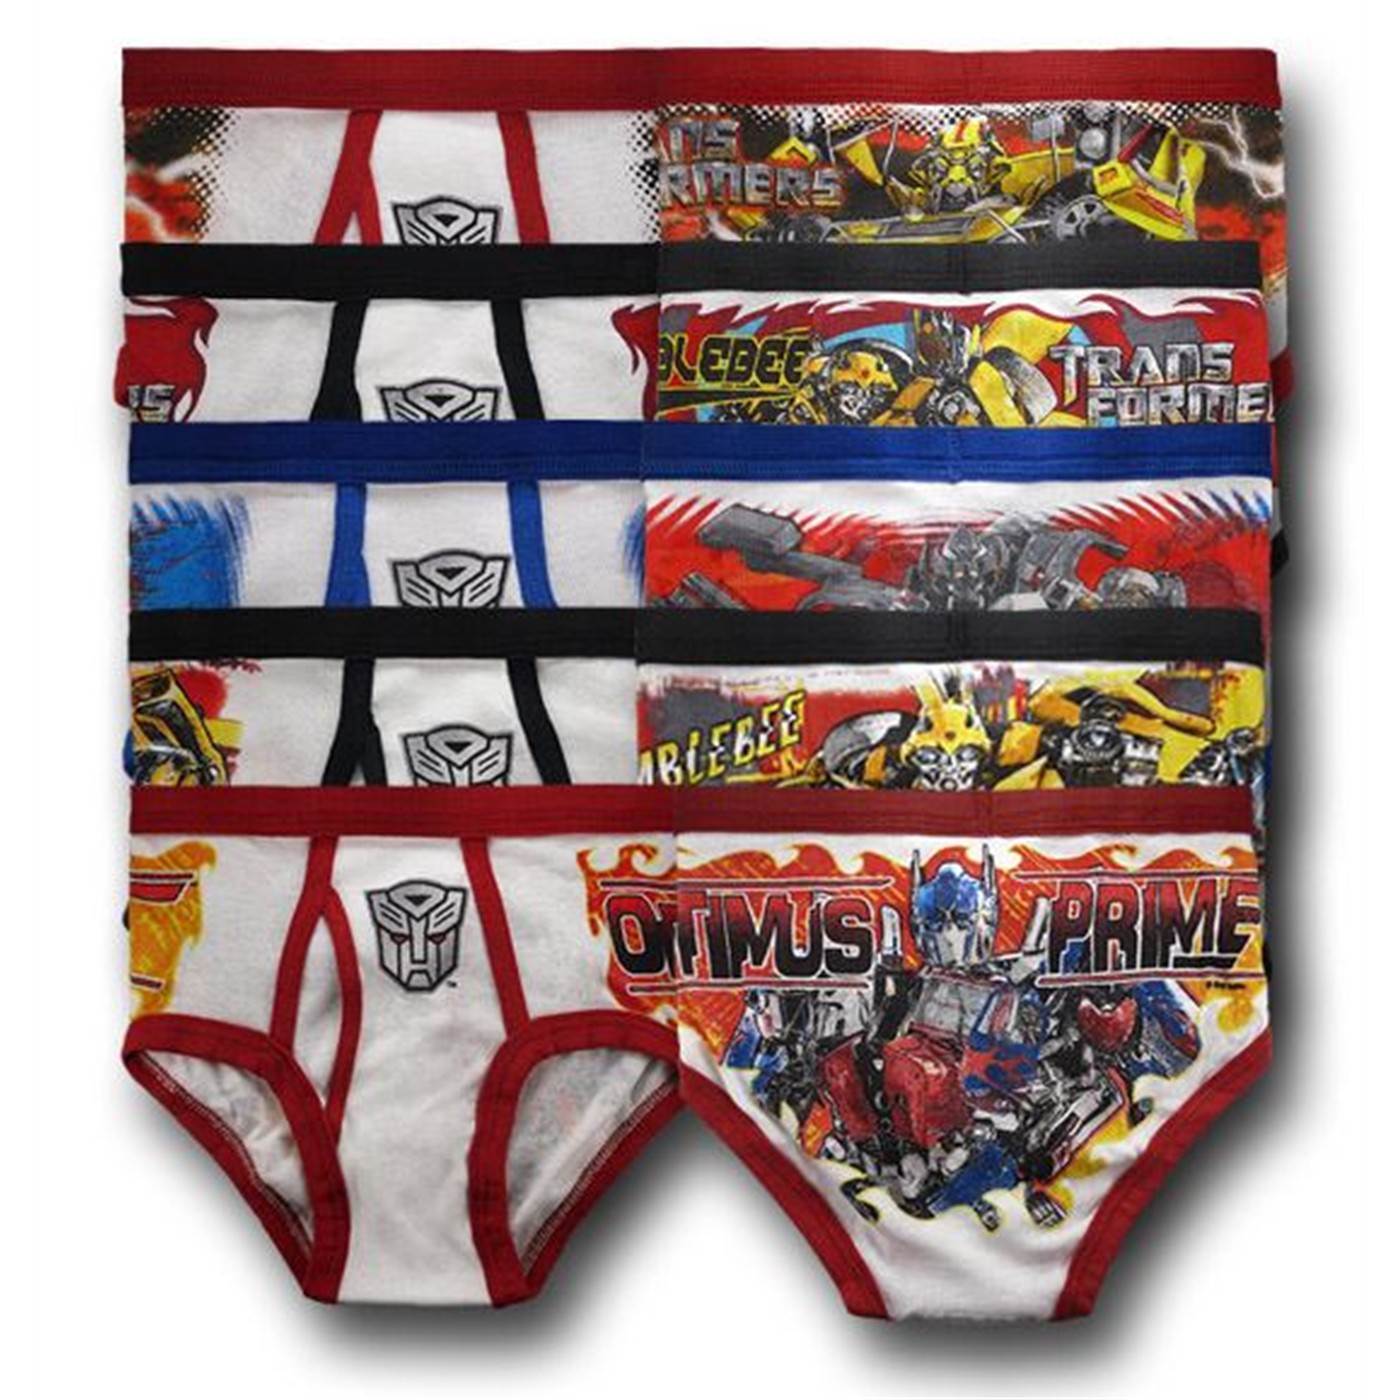 TRANSFORMERS Boys Briefs Pack of 5